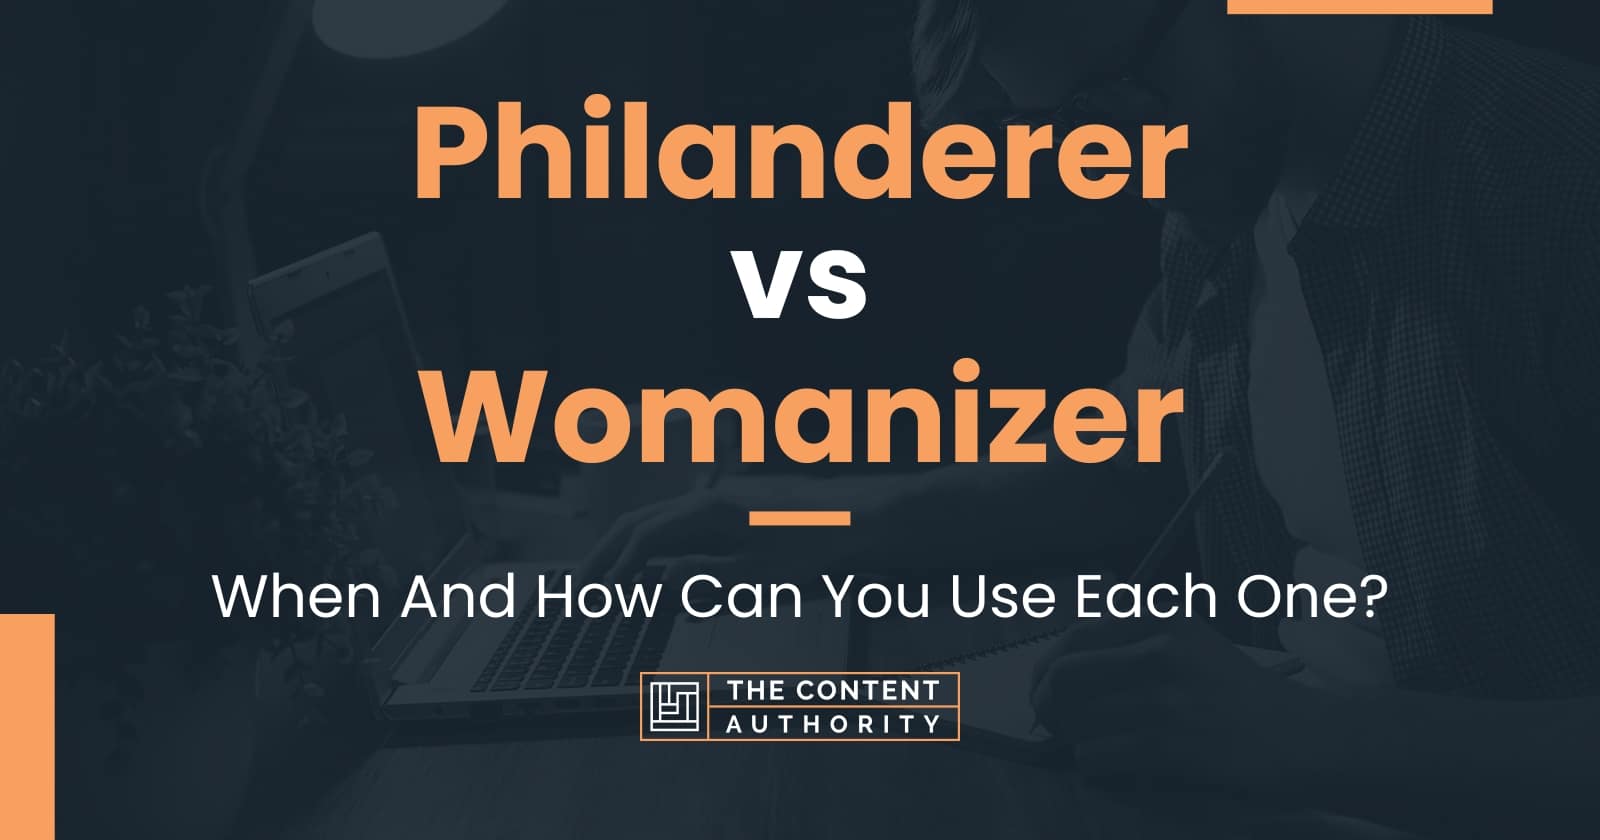 Philanderer vs Womanizer: When And How Can You Use Each One?